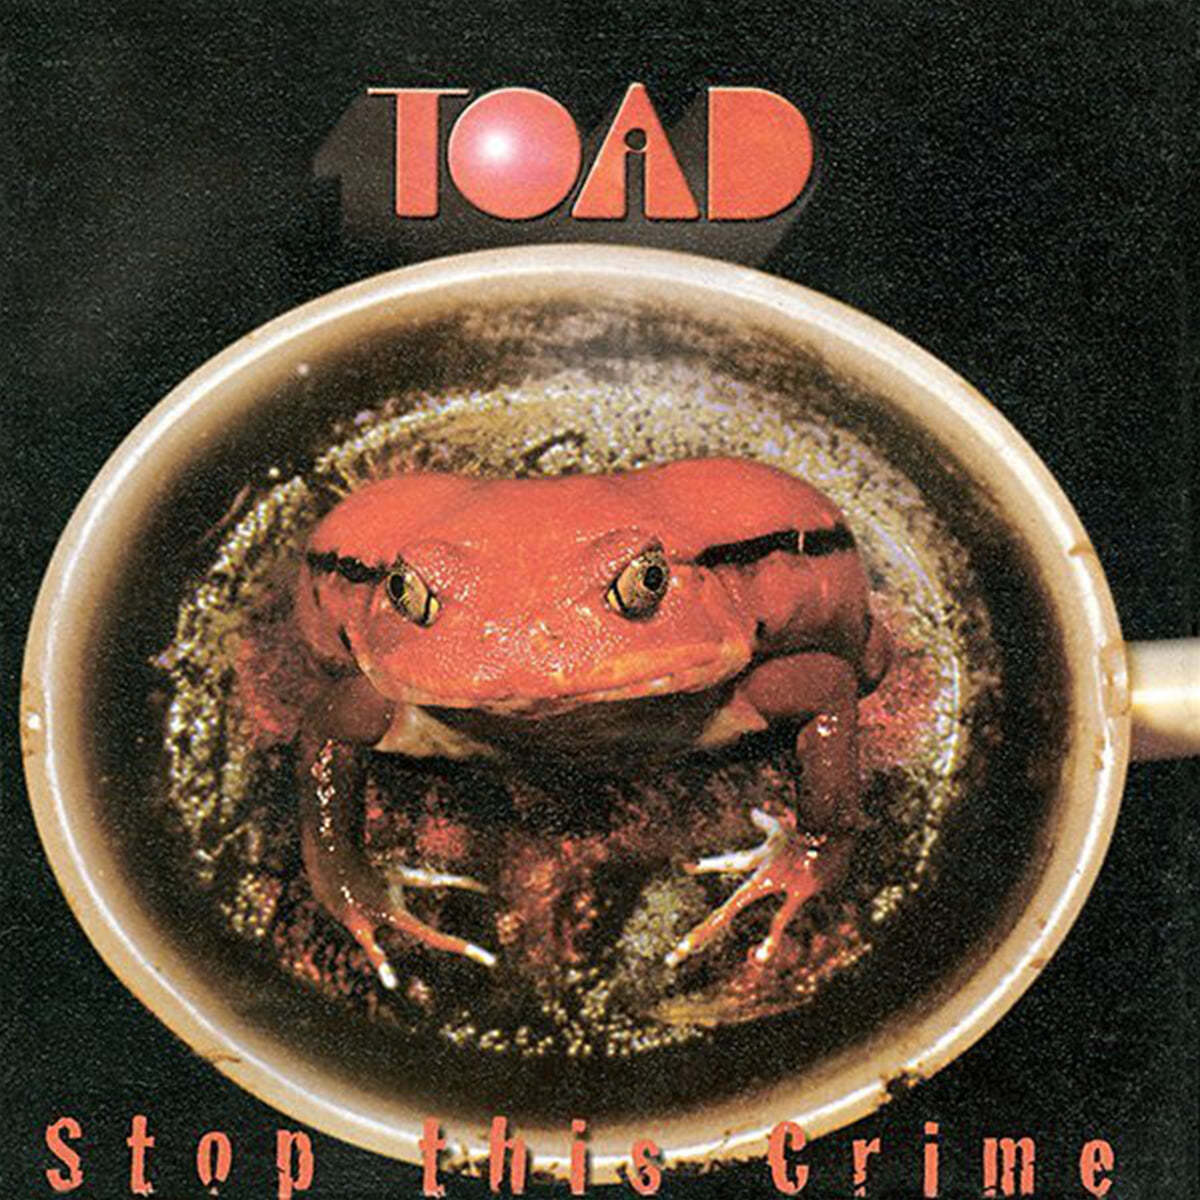 Toad (토드) - Stop This Crime [LP] 